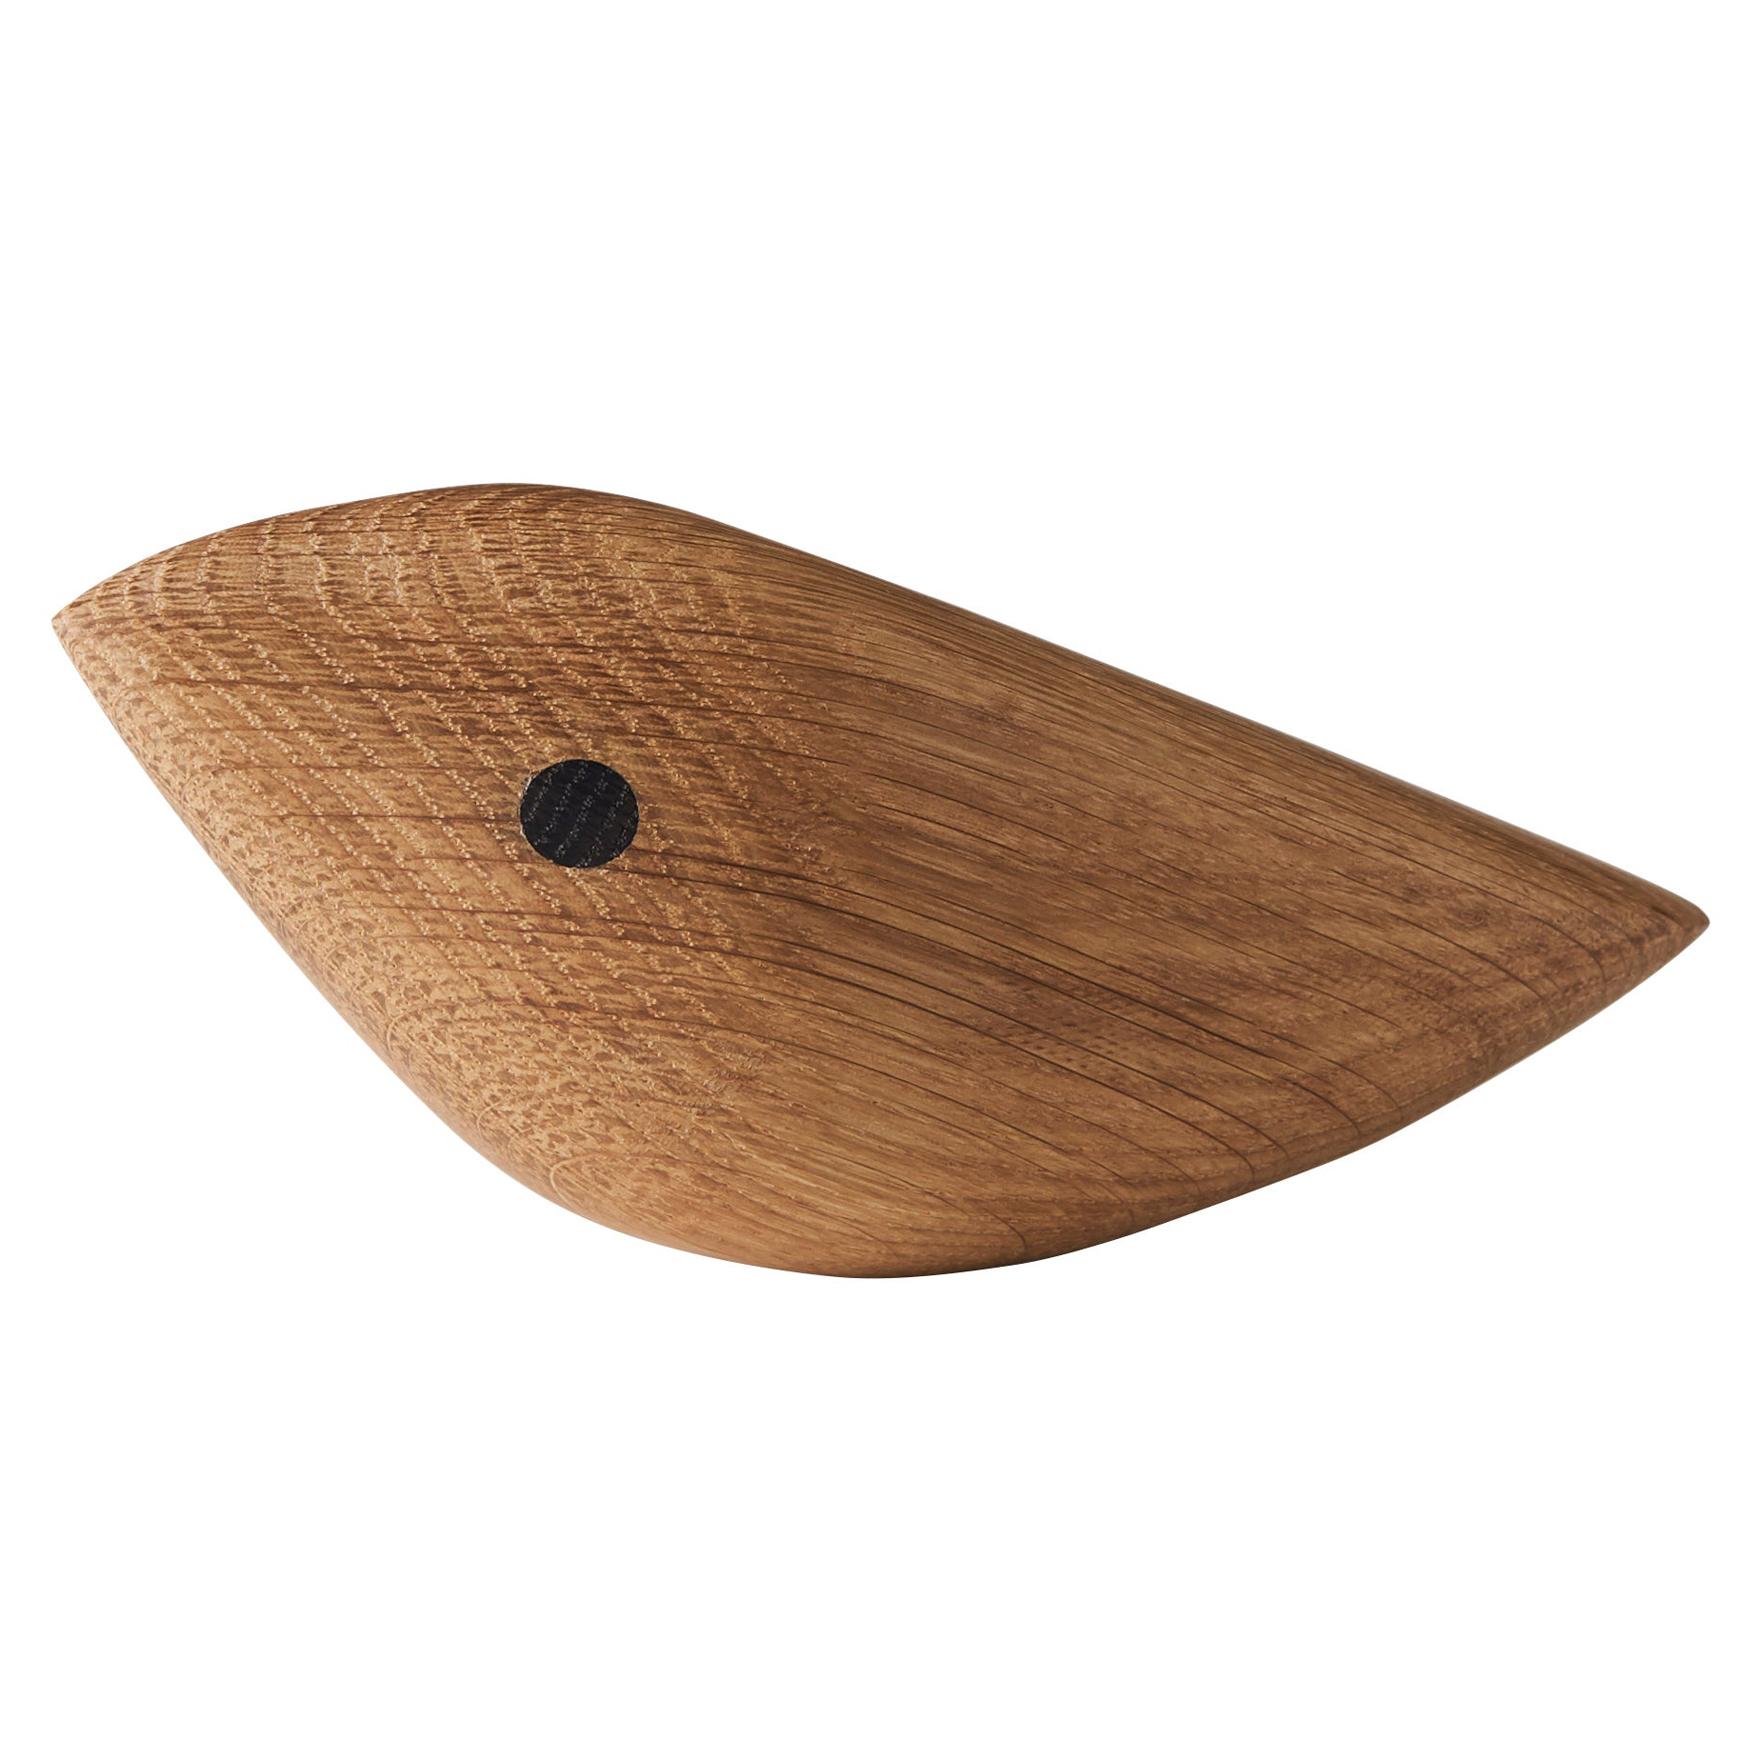 Unique rotating wooden birds, created in the 1950s by the Danish furniture designer and true artist, Jacob Hermann and now being manufactured by Warm Nordic. The Danish-manufactured Twirling Birds are ideal as a personal gift that will delight